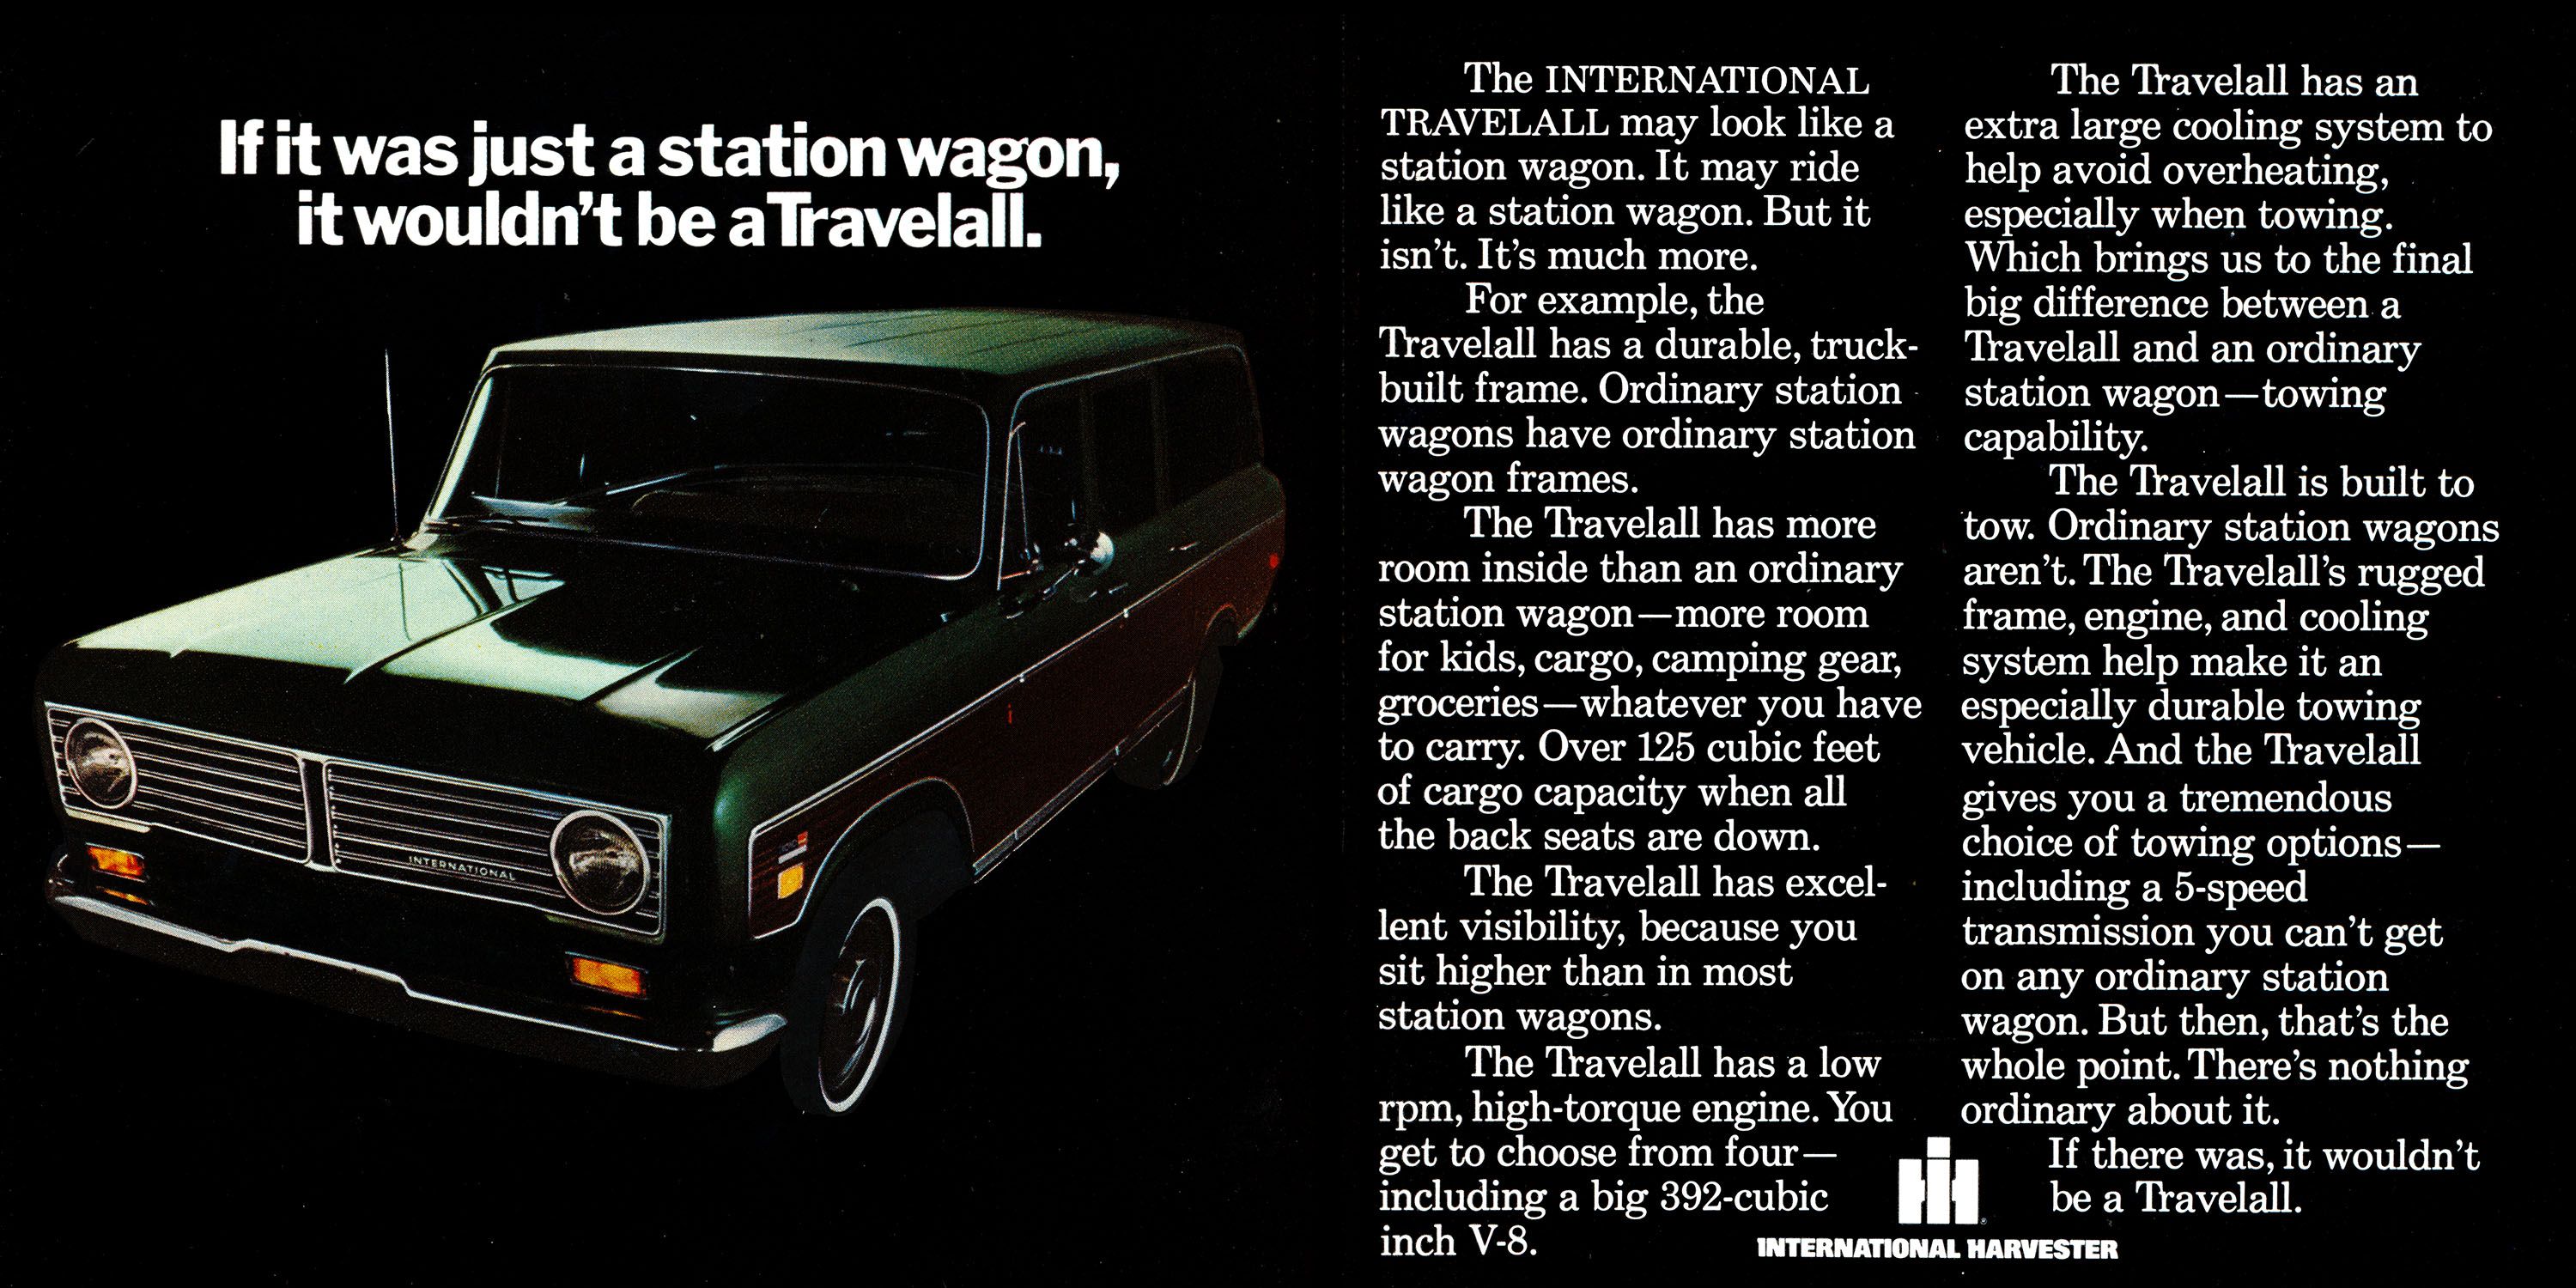 1973 International Harvester Travelall Is More than Just a Station Wagon